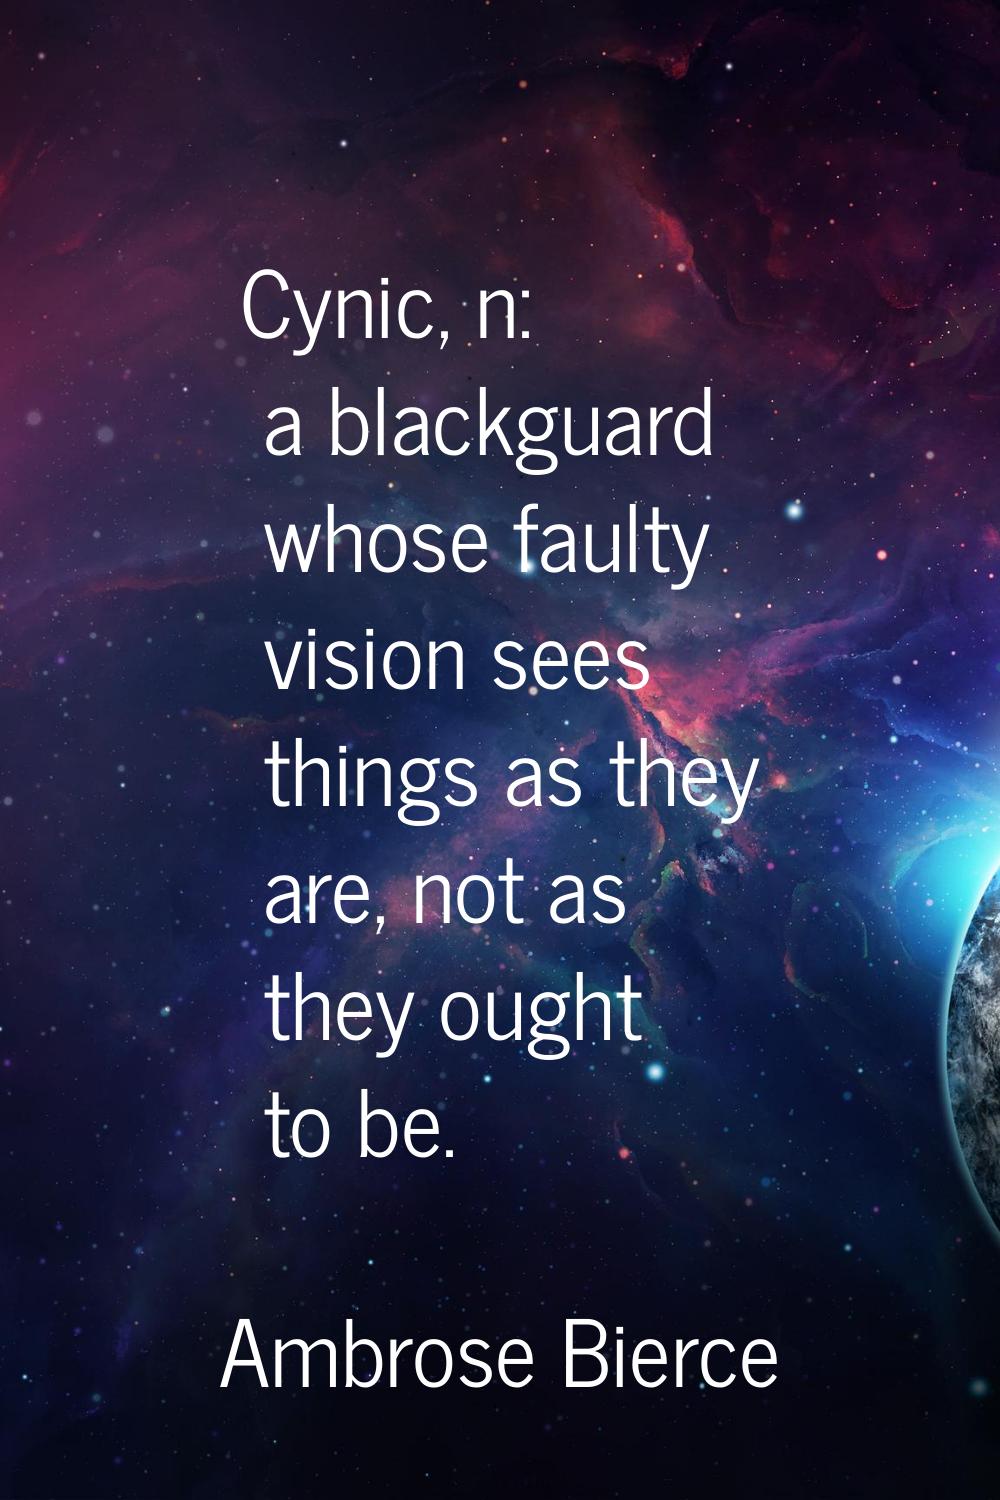 Cynic, n: a blackguard whose faulty vision sees things as they are, not as they ought to be.